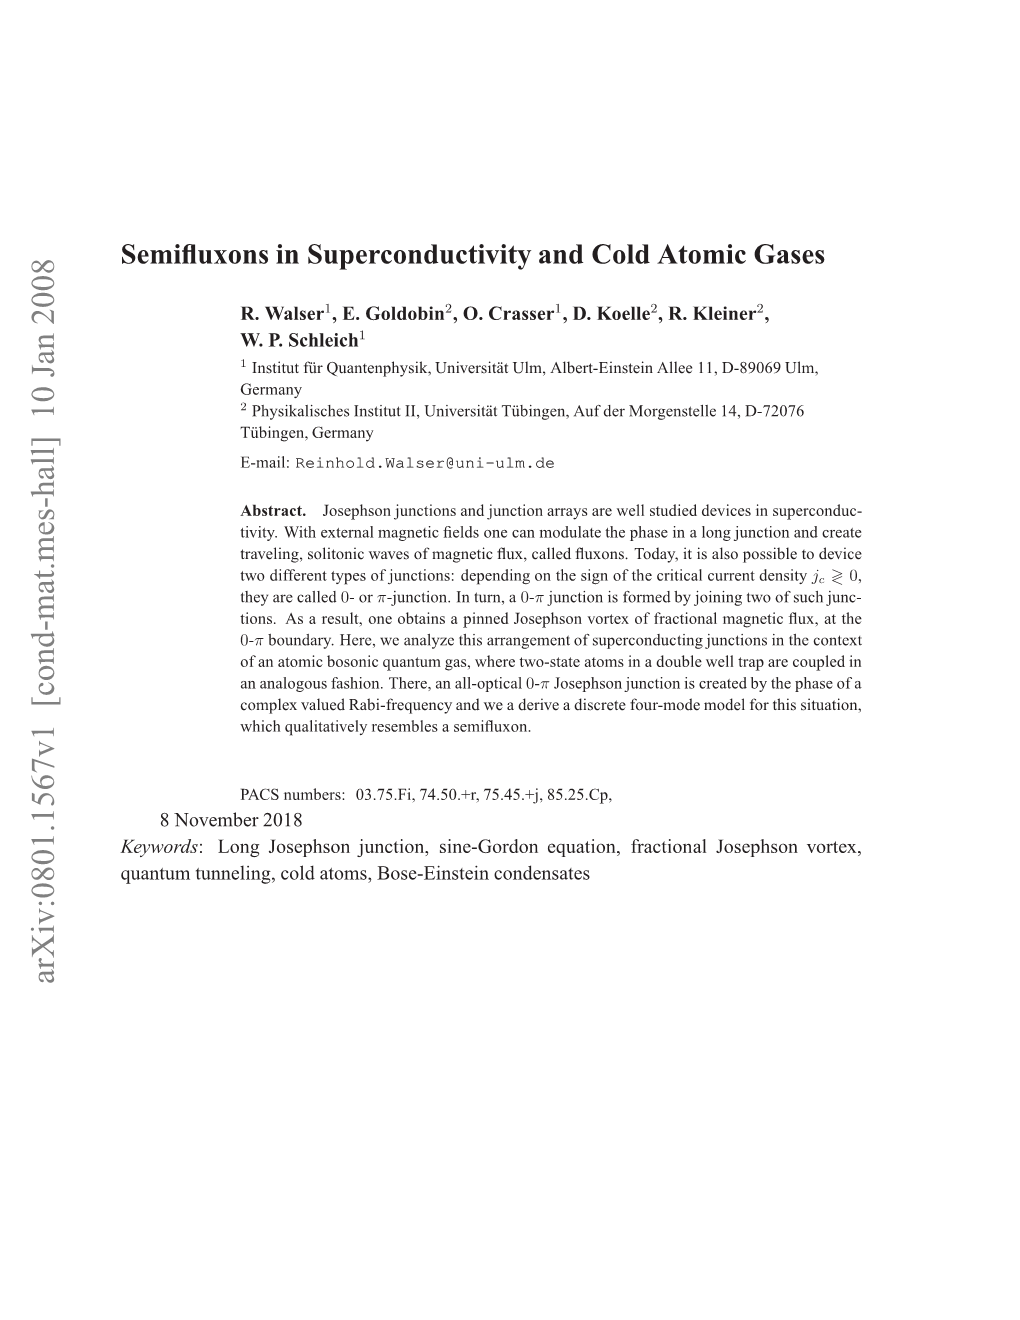 Semifluxons in Superconductivity and Cold Atomic Gases